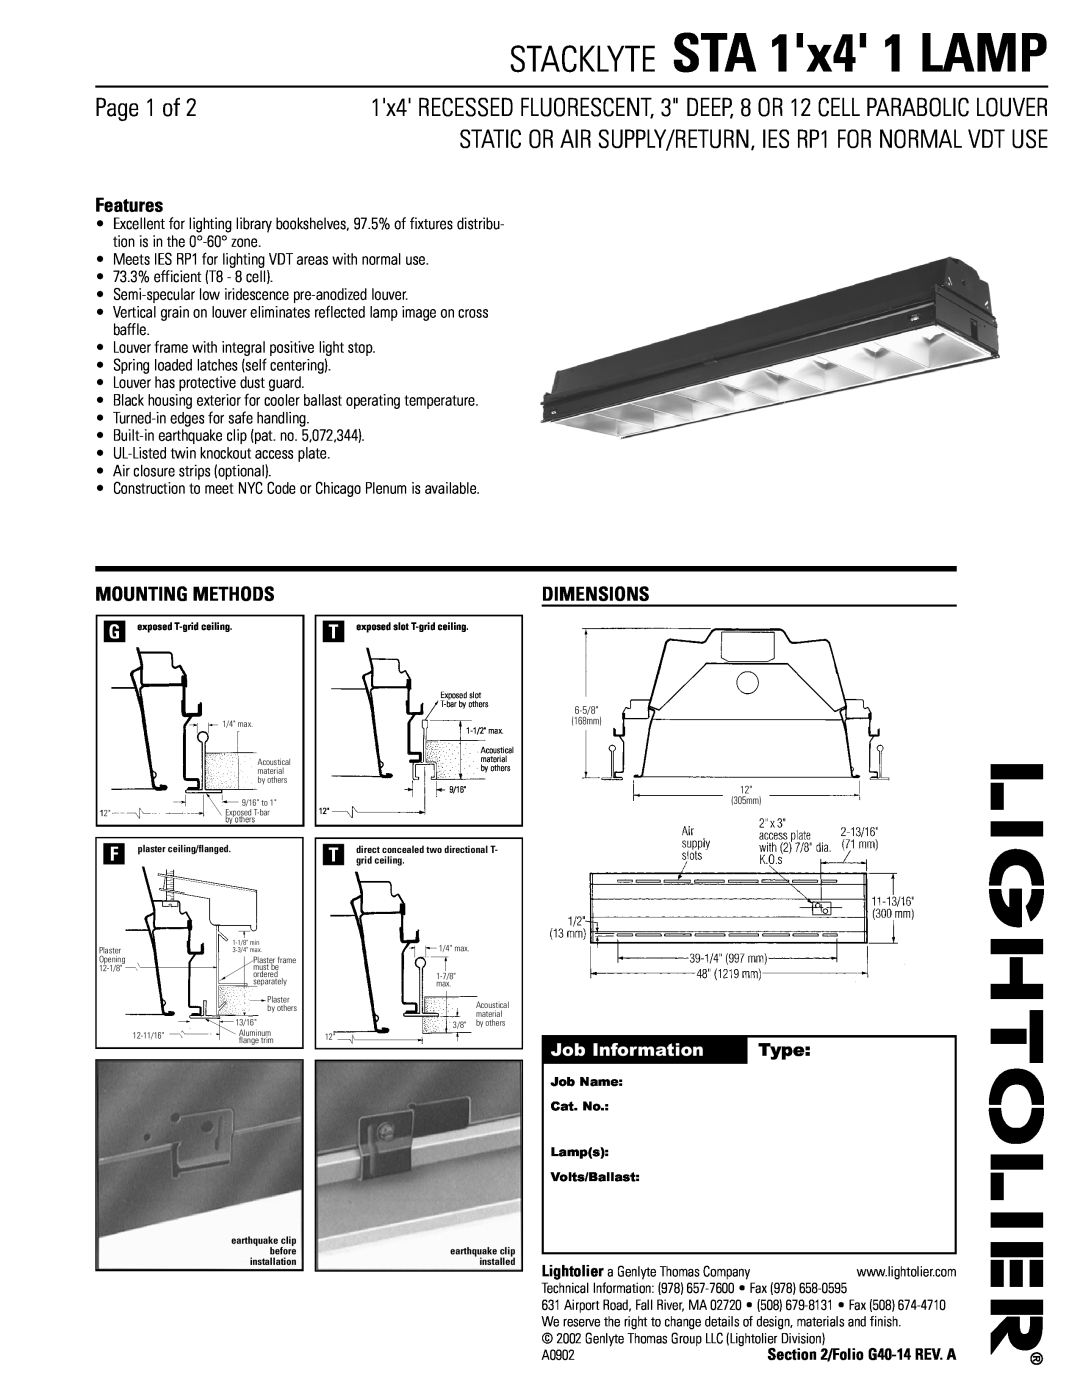 Lightolier STA1G8LR132120SO dimensions STACKLYTE STA 1x4 1 LAMP, Page 1 of, Features, Mounting Methods, Dimensions, Type 